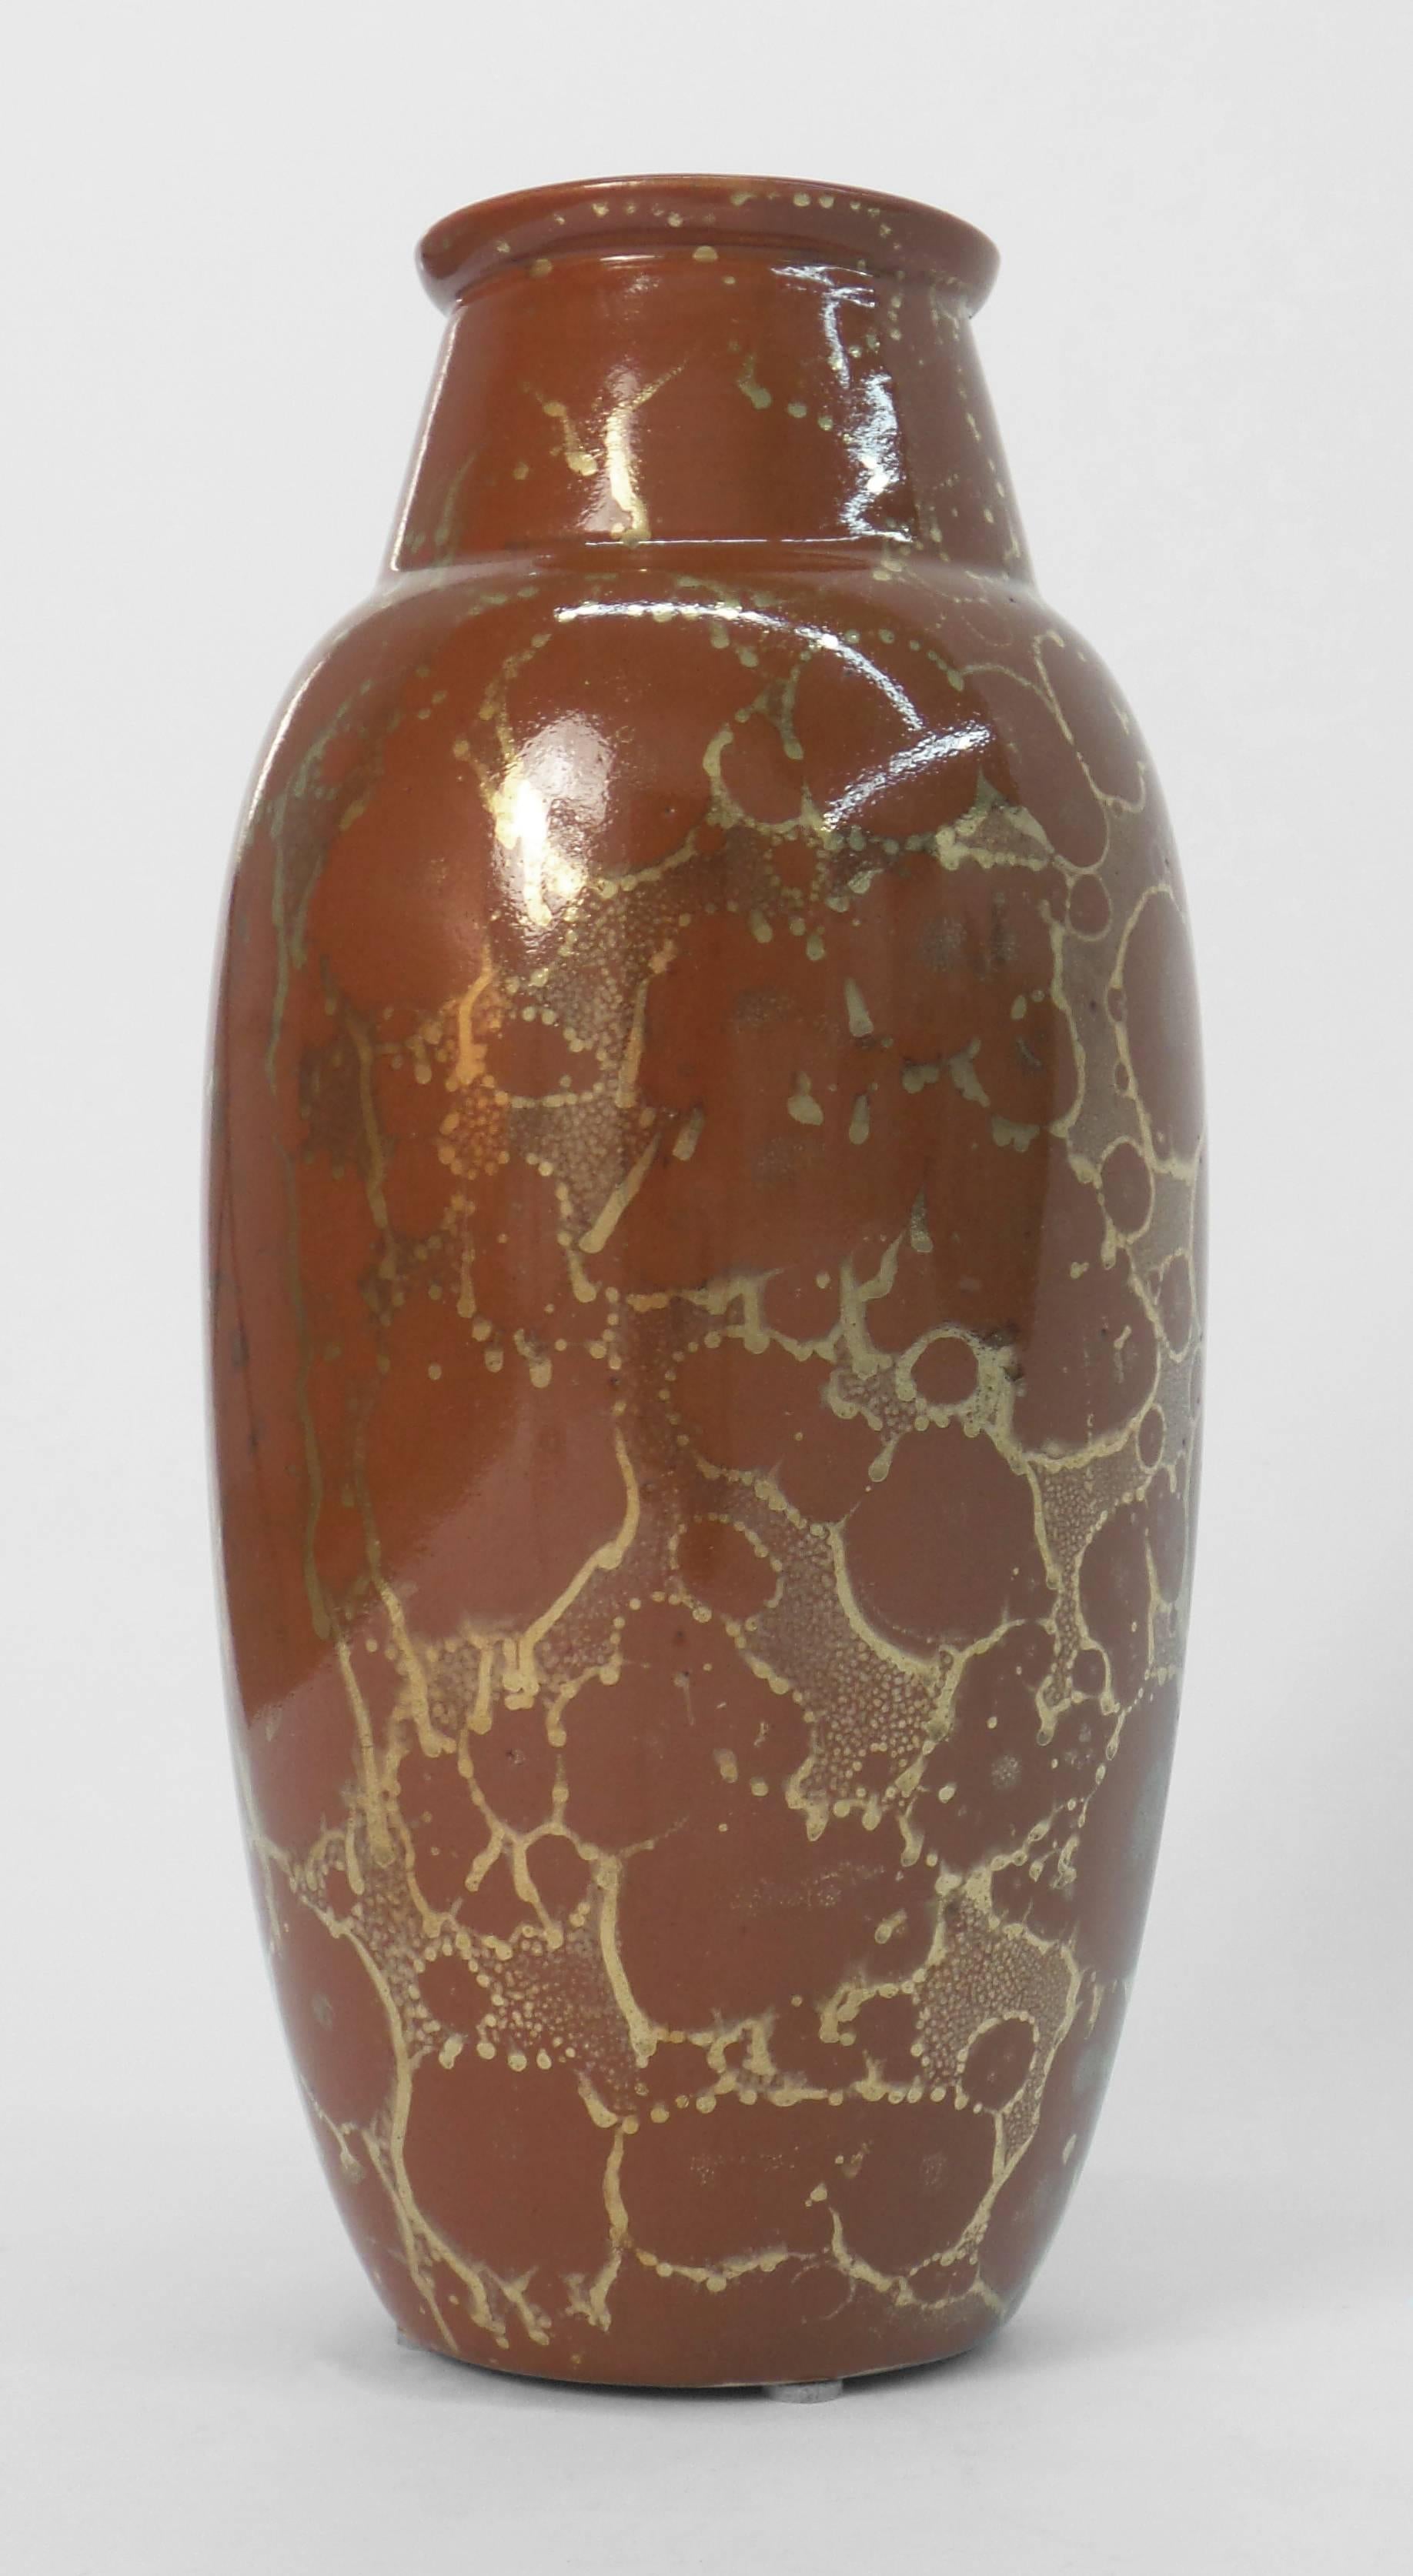 An Art Deco period hard stone vase having a brown glaze with gold décor. Made by Lucien Brisdoux (1878-1963). St. Amand, France, circa 1925. Signed.